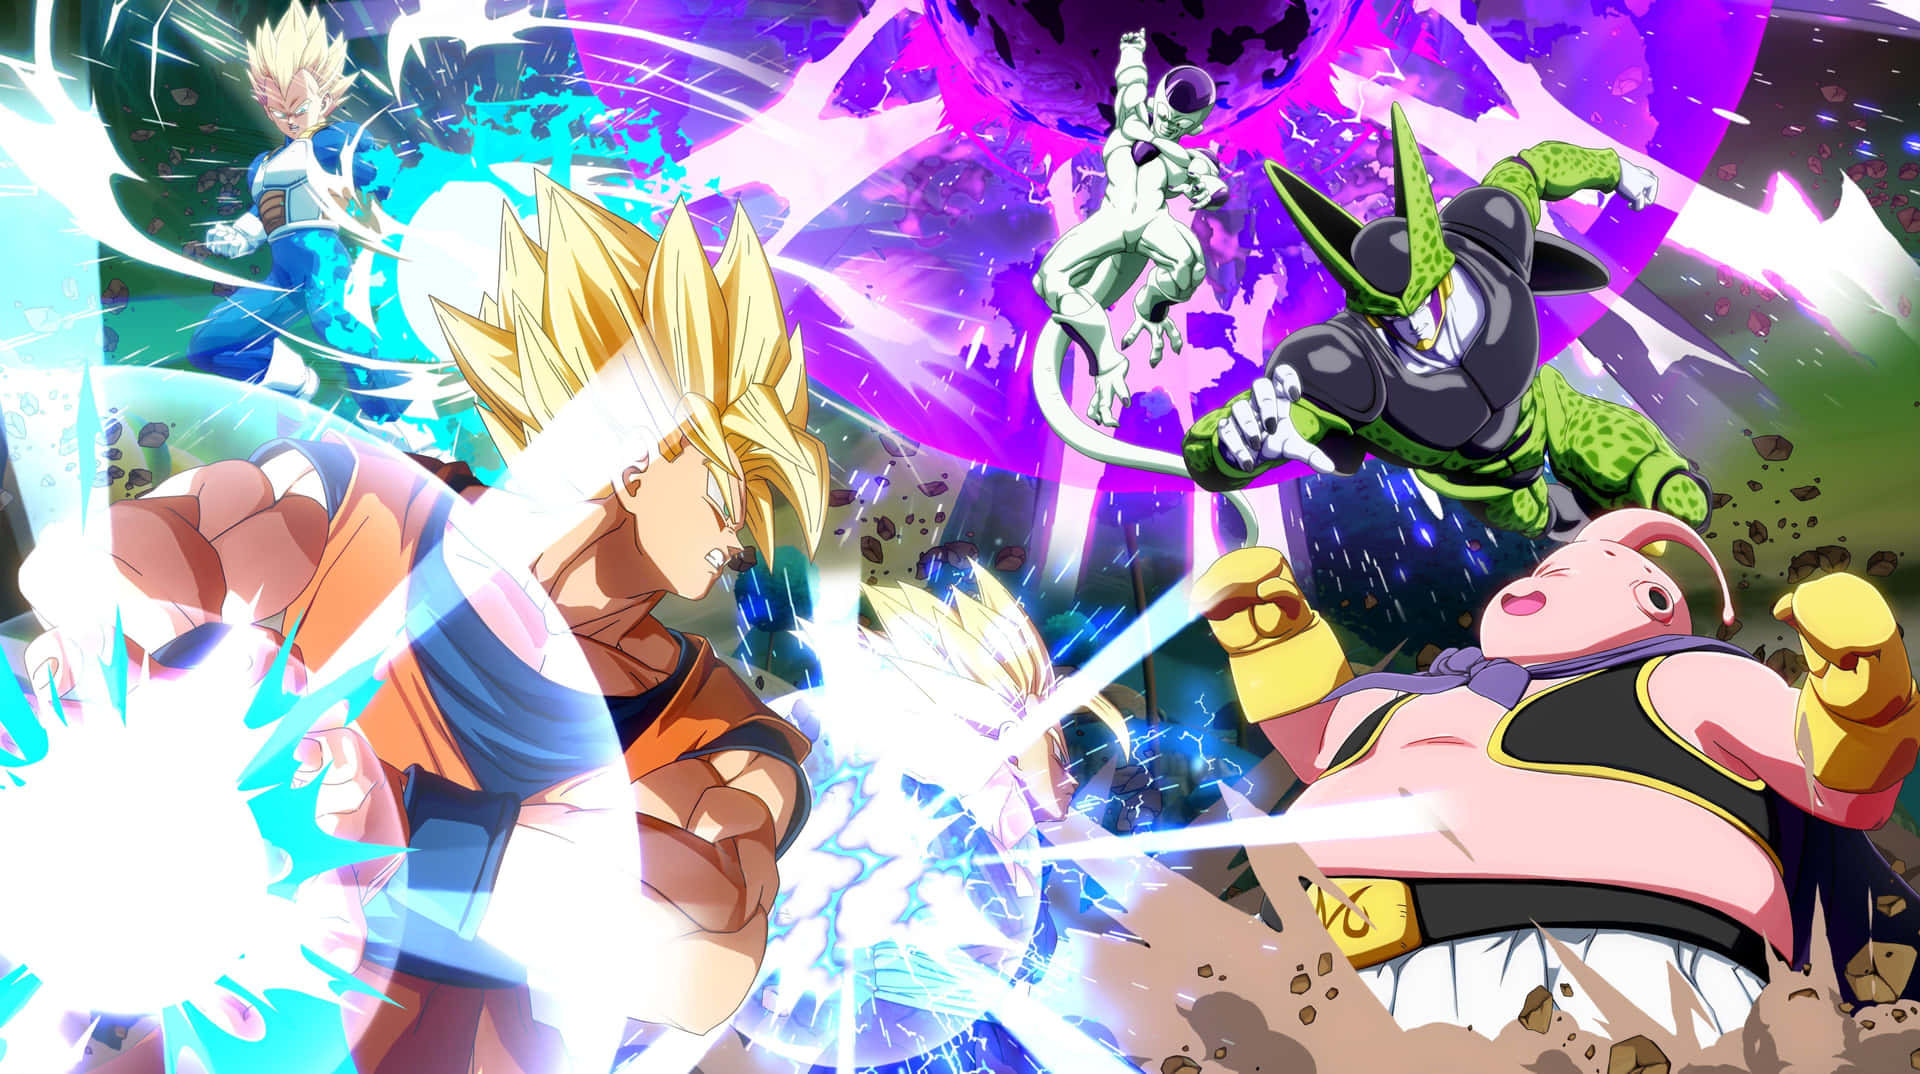 Dragon Ball Z Characters in an Epic Showdown